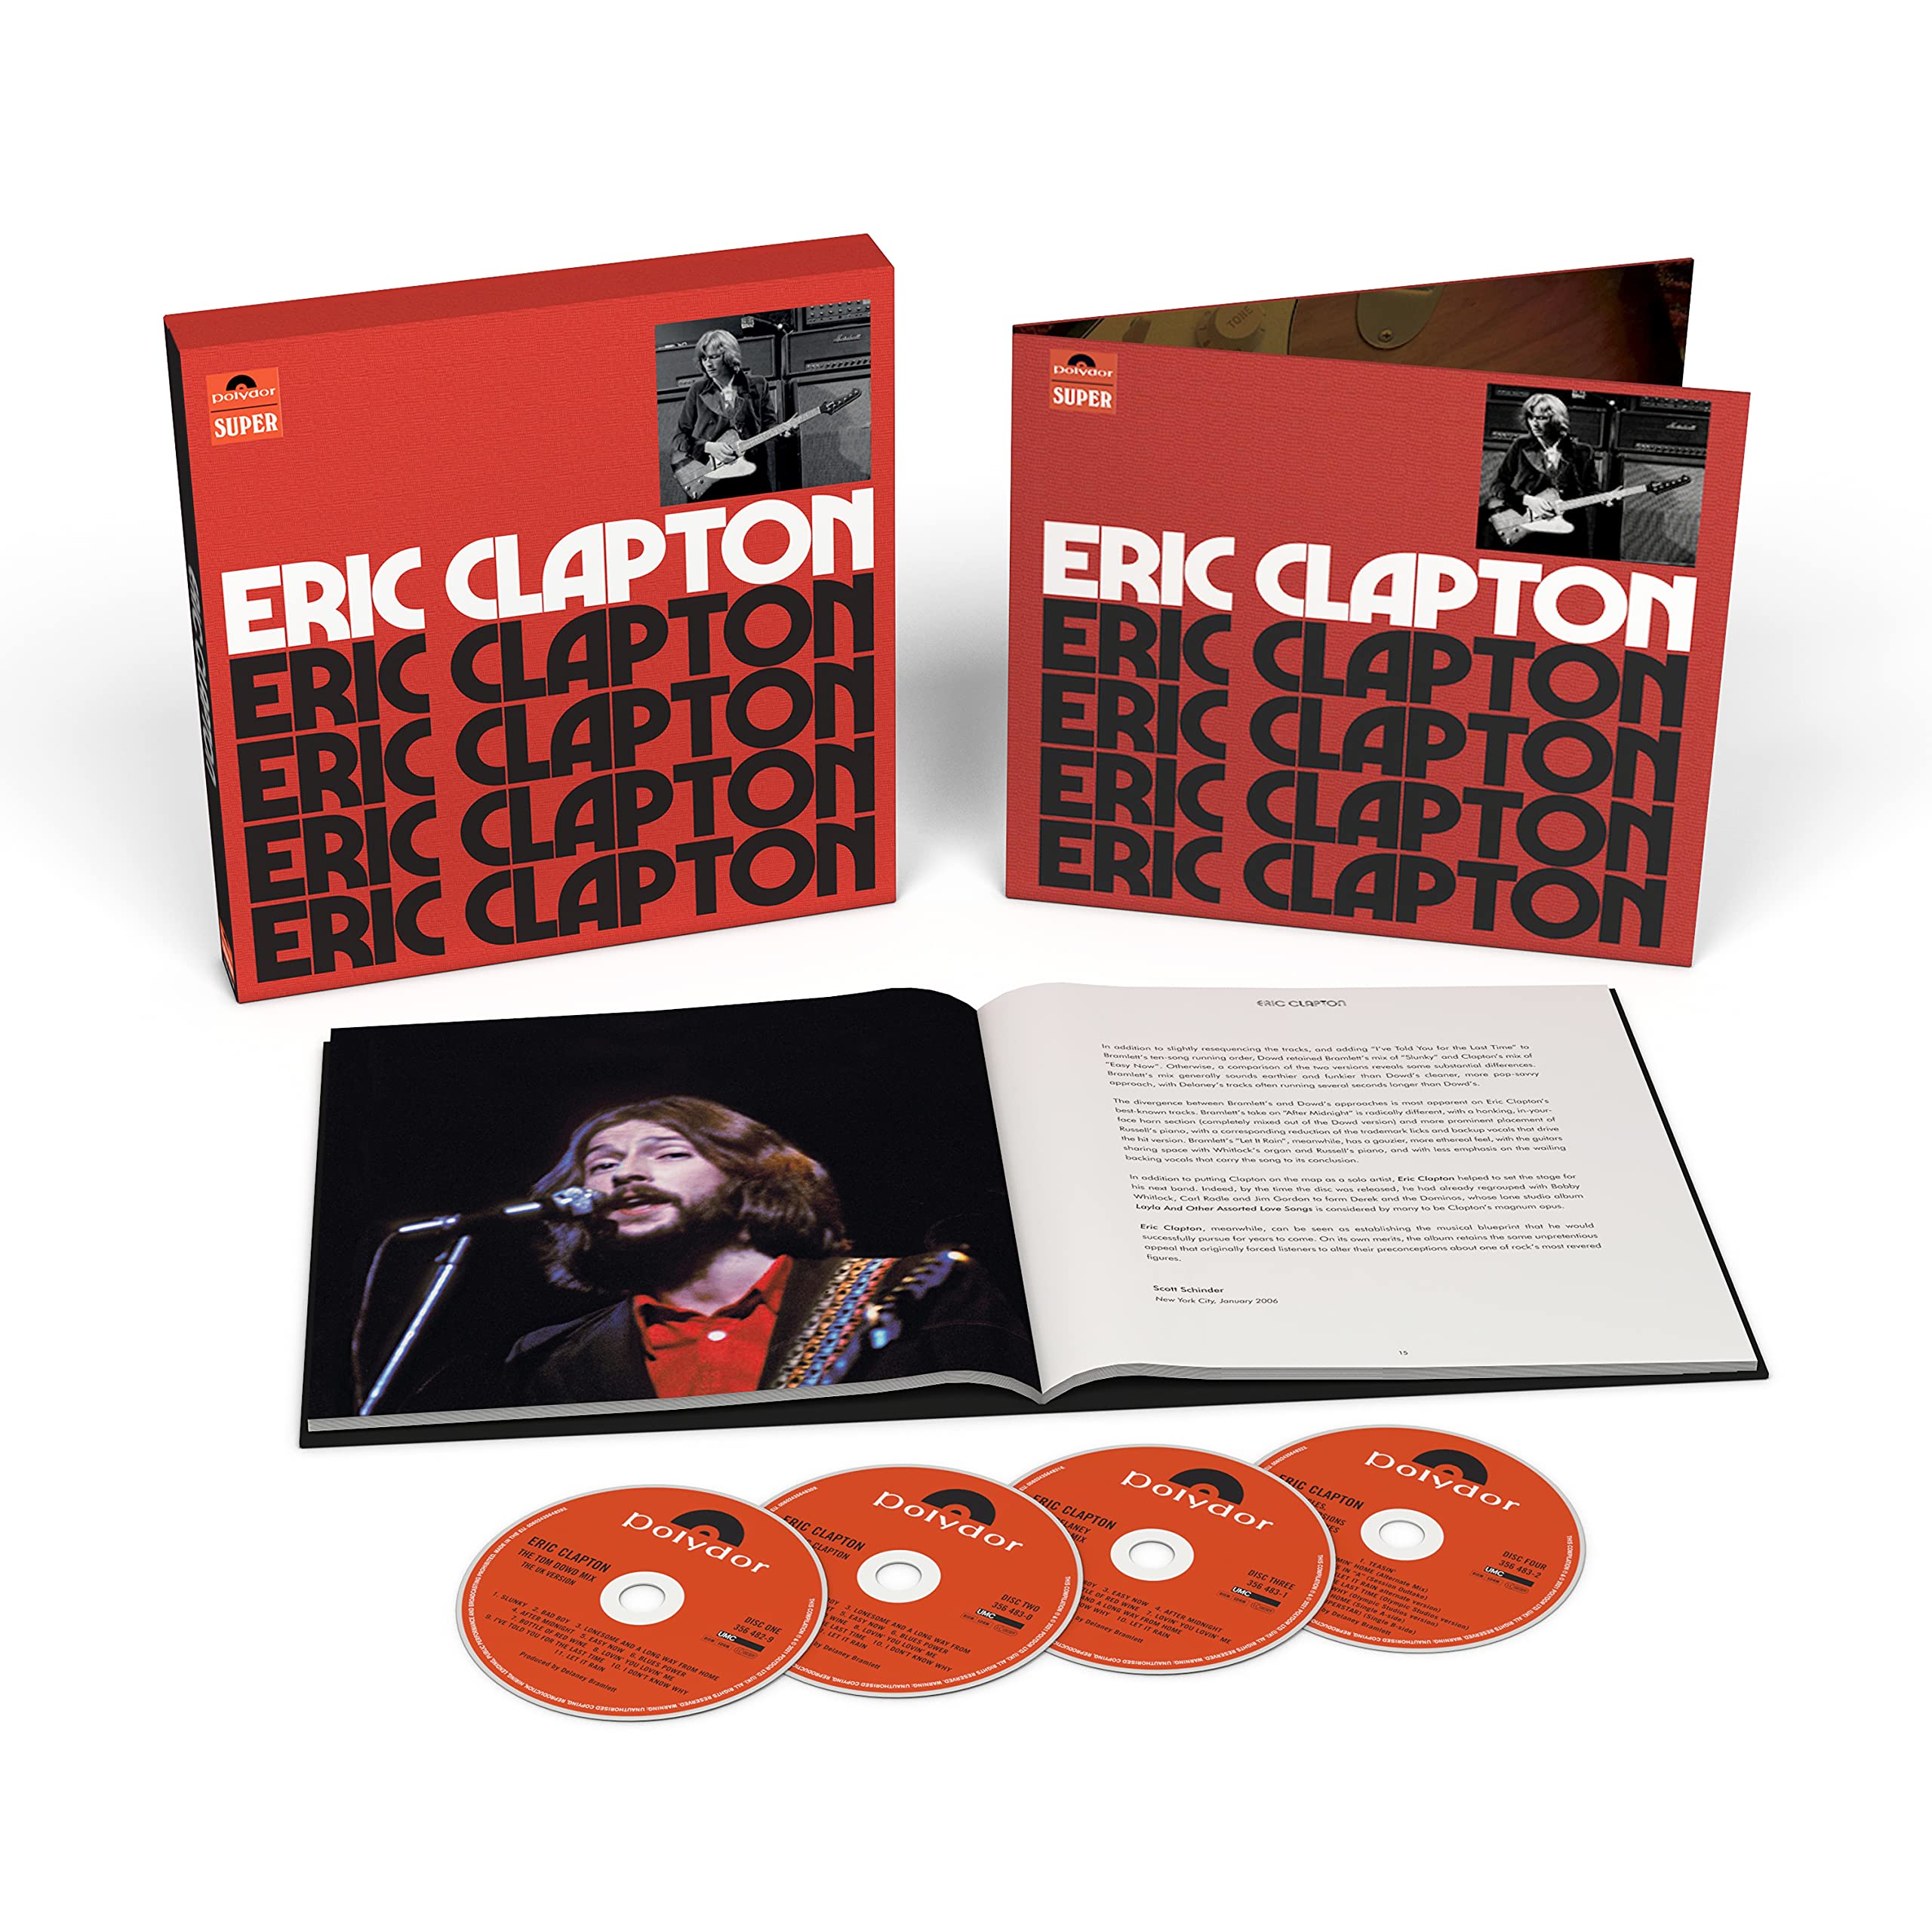 oprindelse Mindre uddybe Eric Clapton Reissues Debut Solo Album In 4CD Box, and 1LP Set